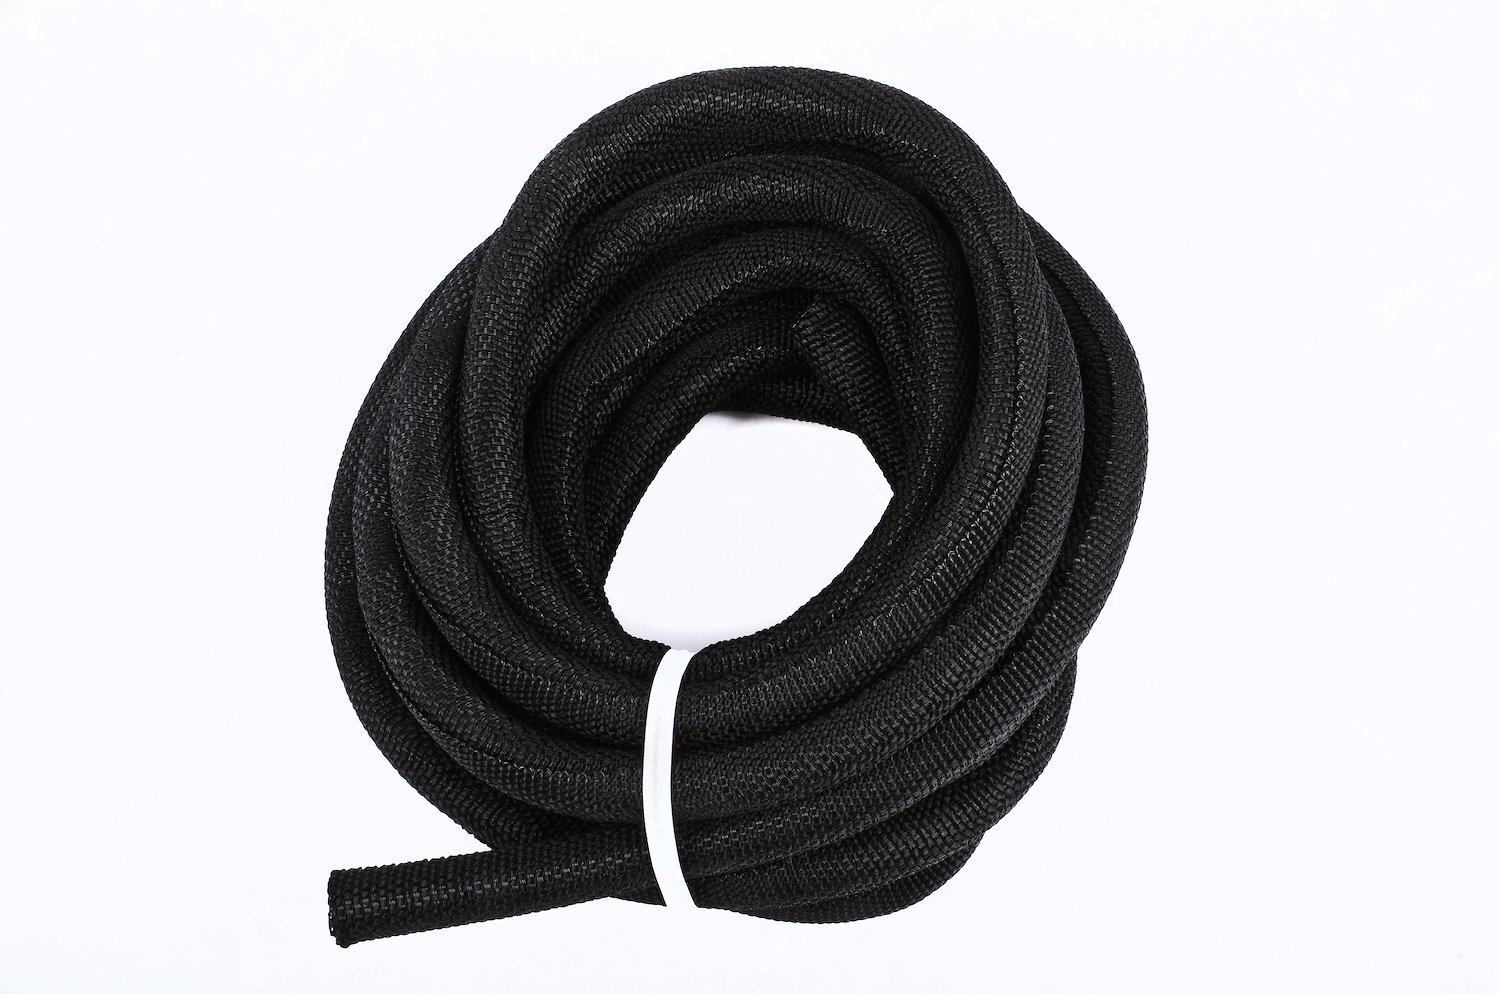 Classic Wire Harness and Hose Wrap 5/16 in. diameter x 10 ft.